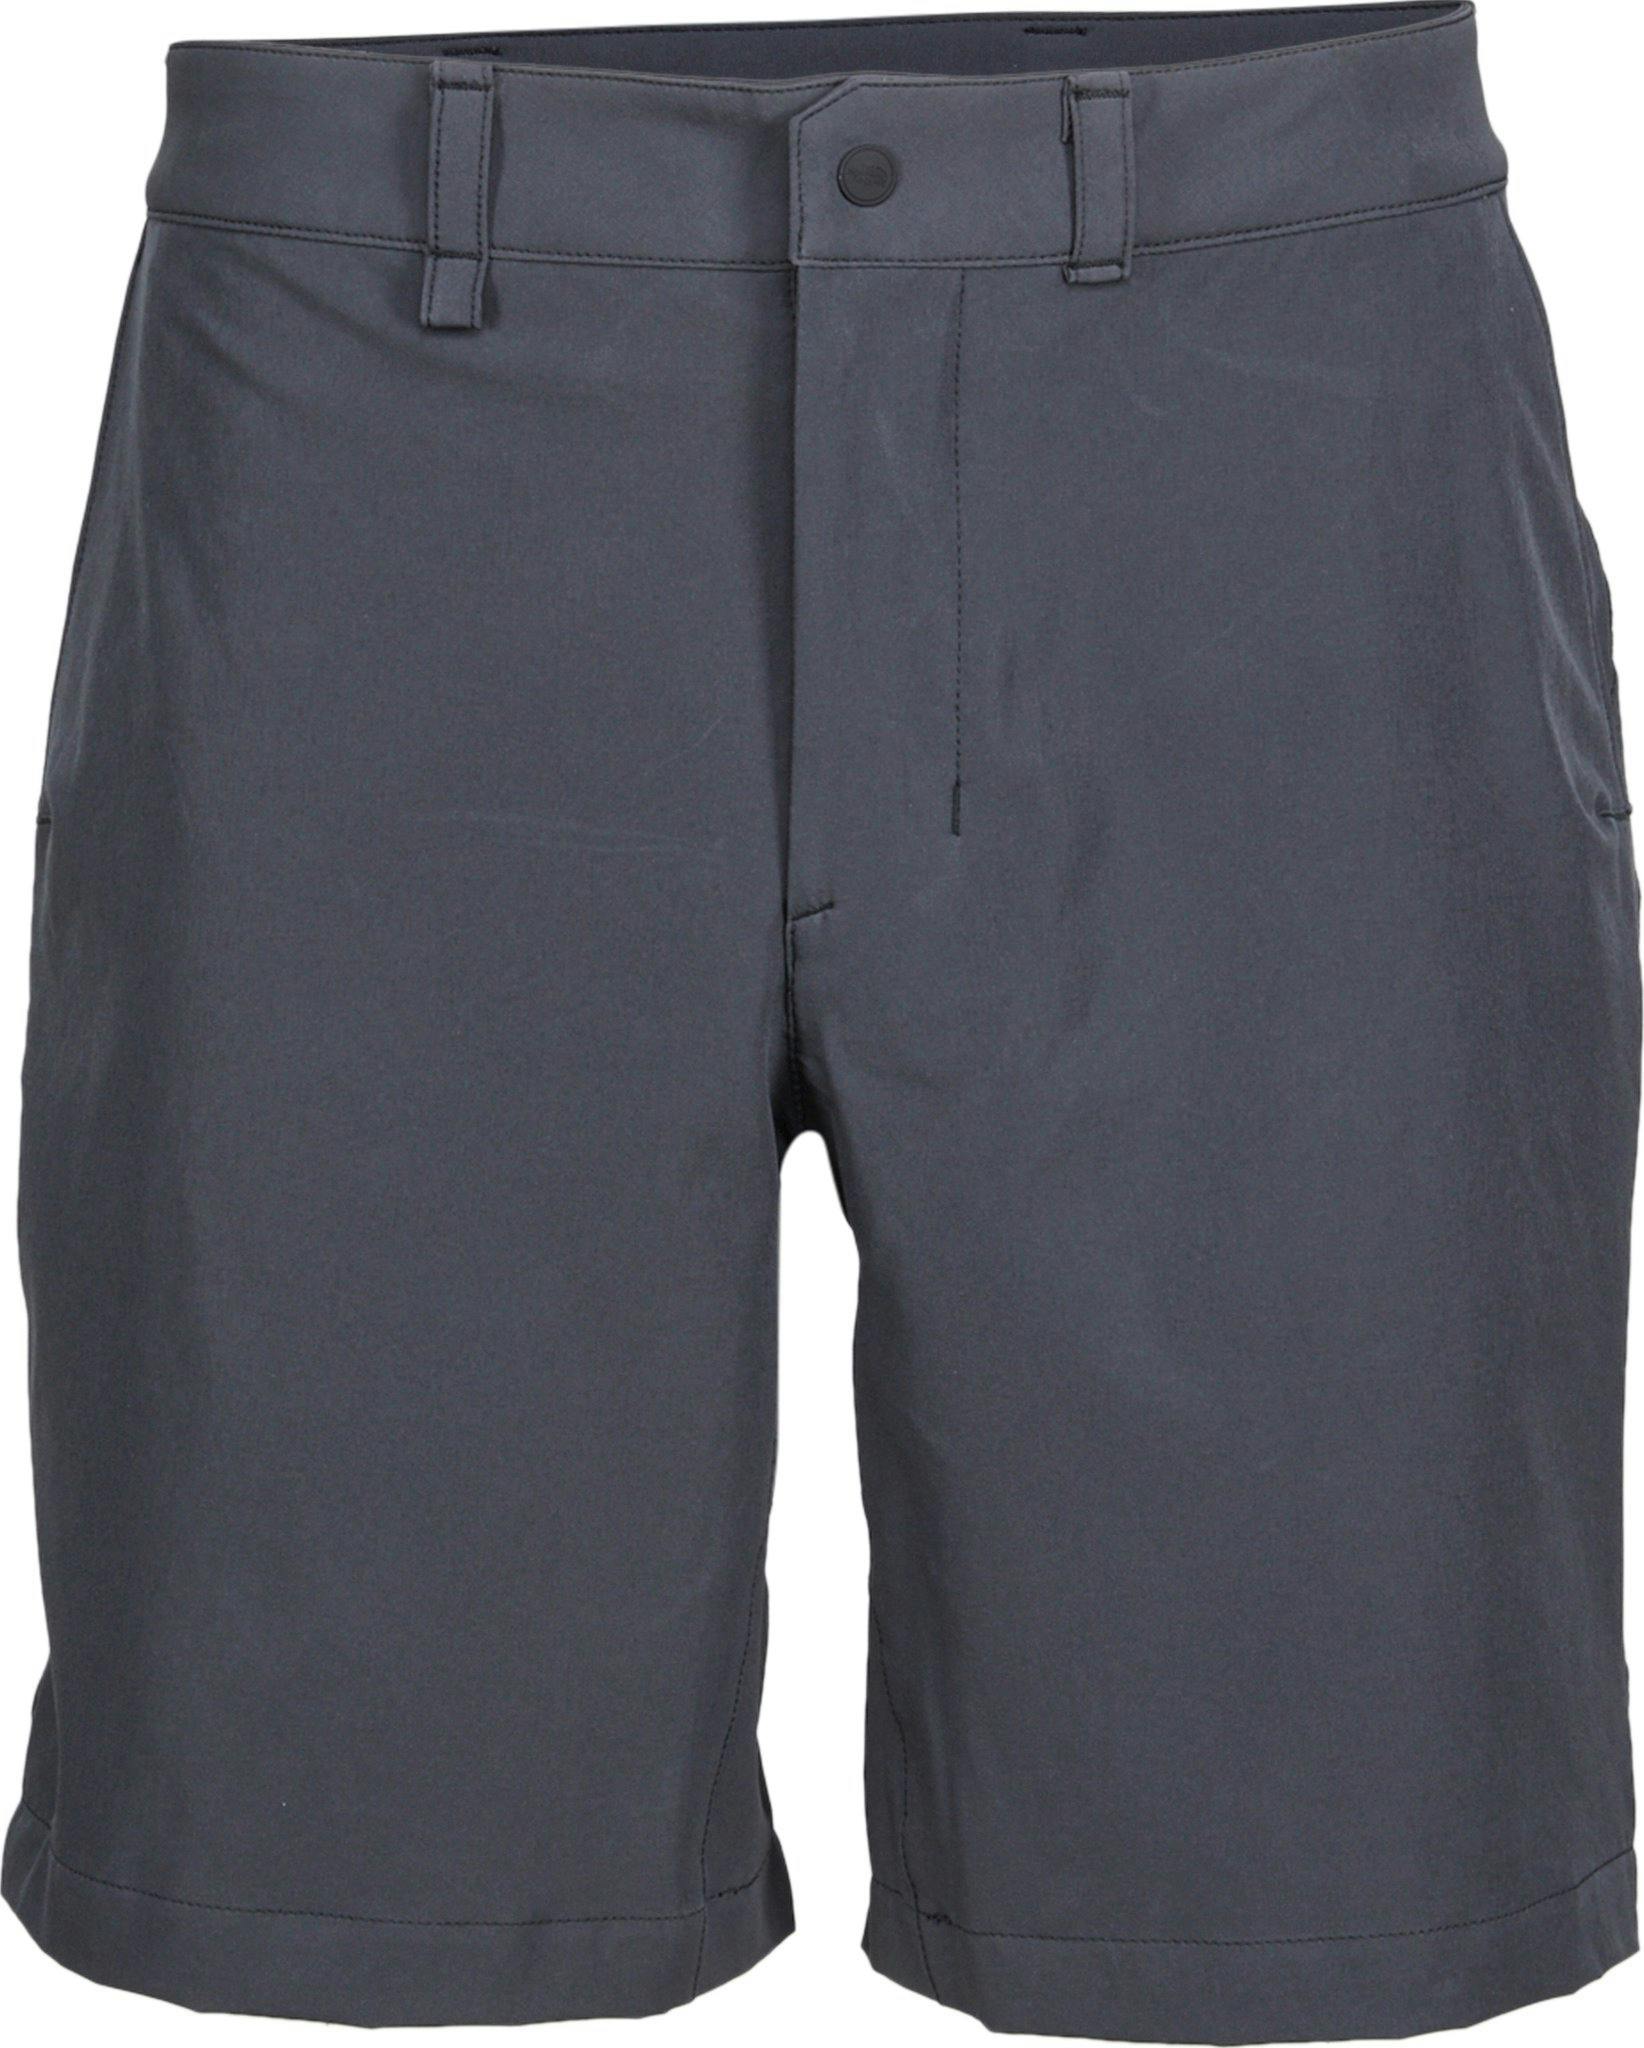 Product image for Paramount Shorts - Men’s